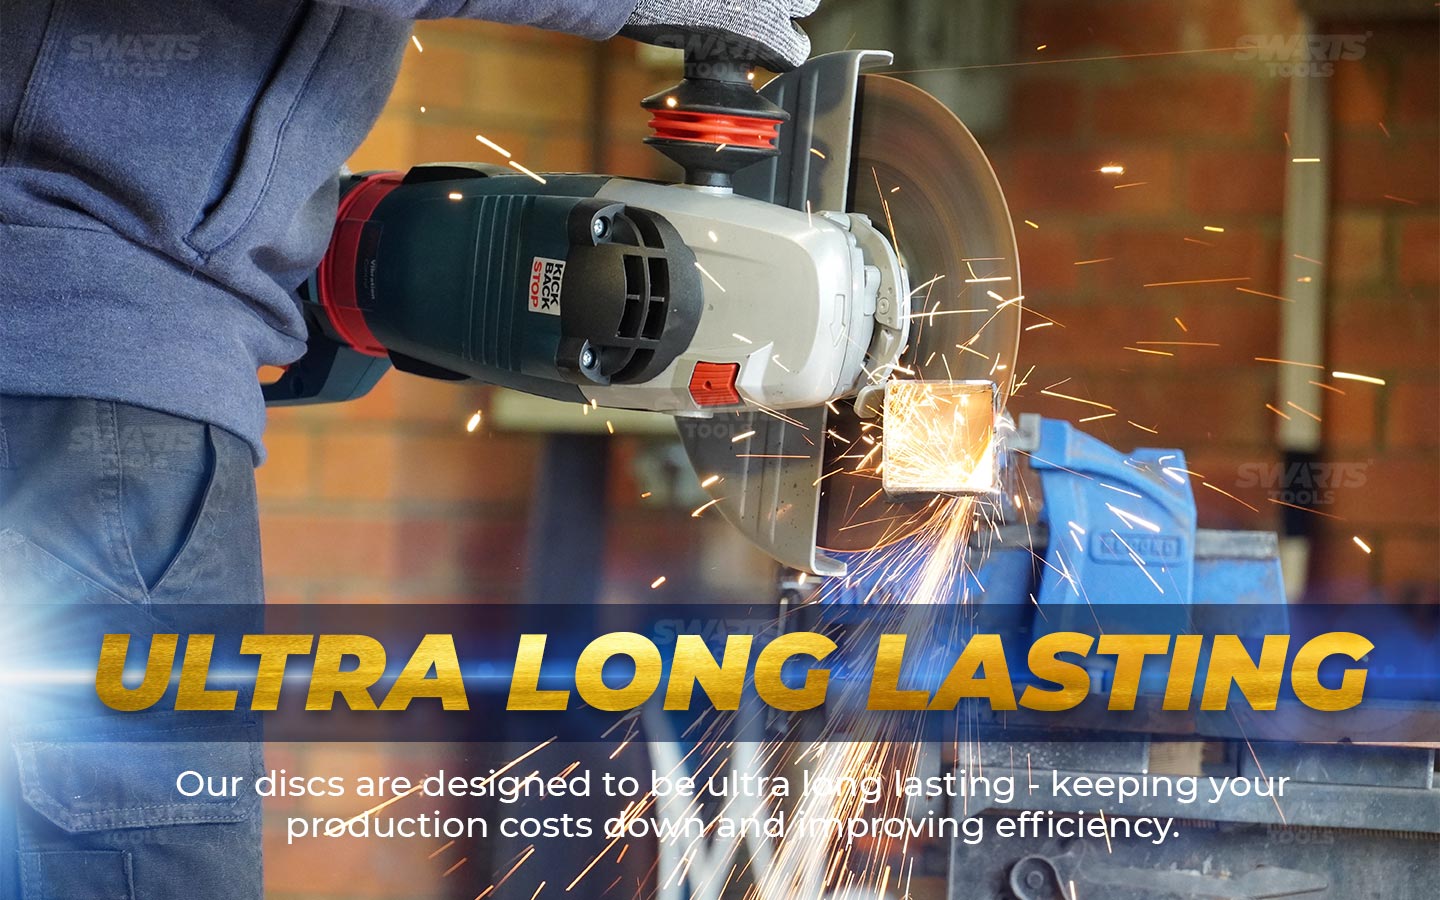 Ultra long lasting, our discs are designed to be ultra long lasting - keeping your production costs down and improving efficiency